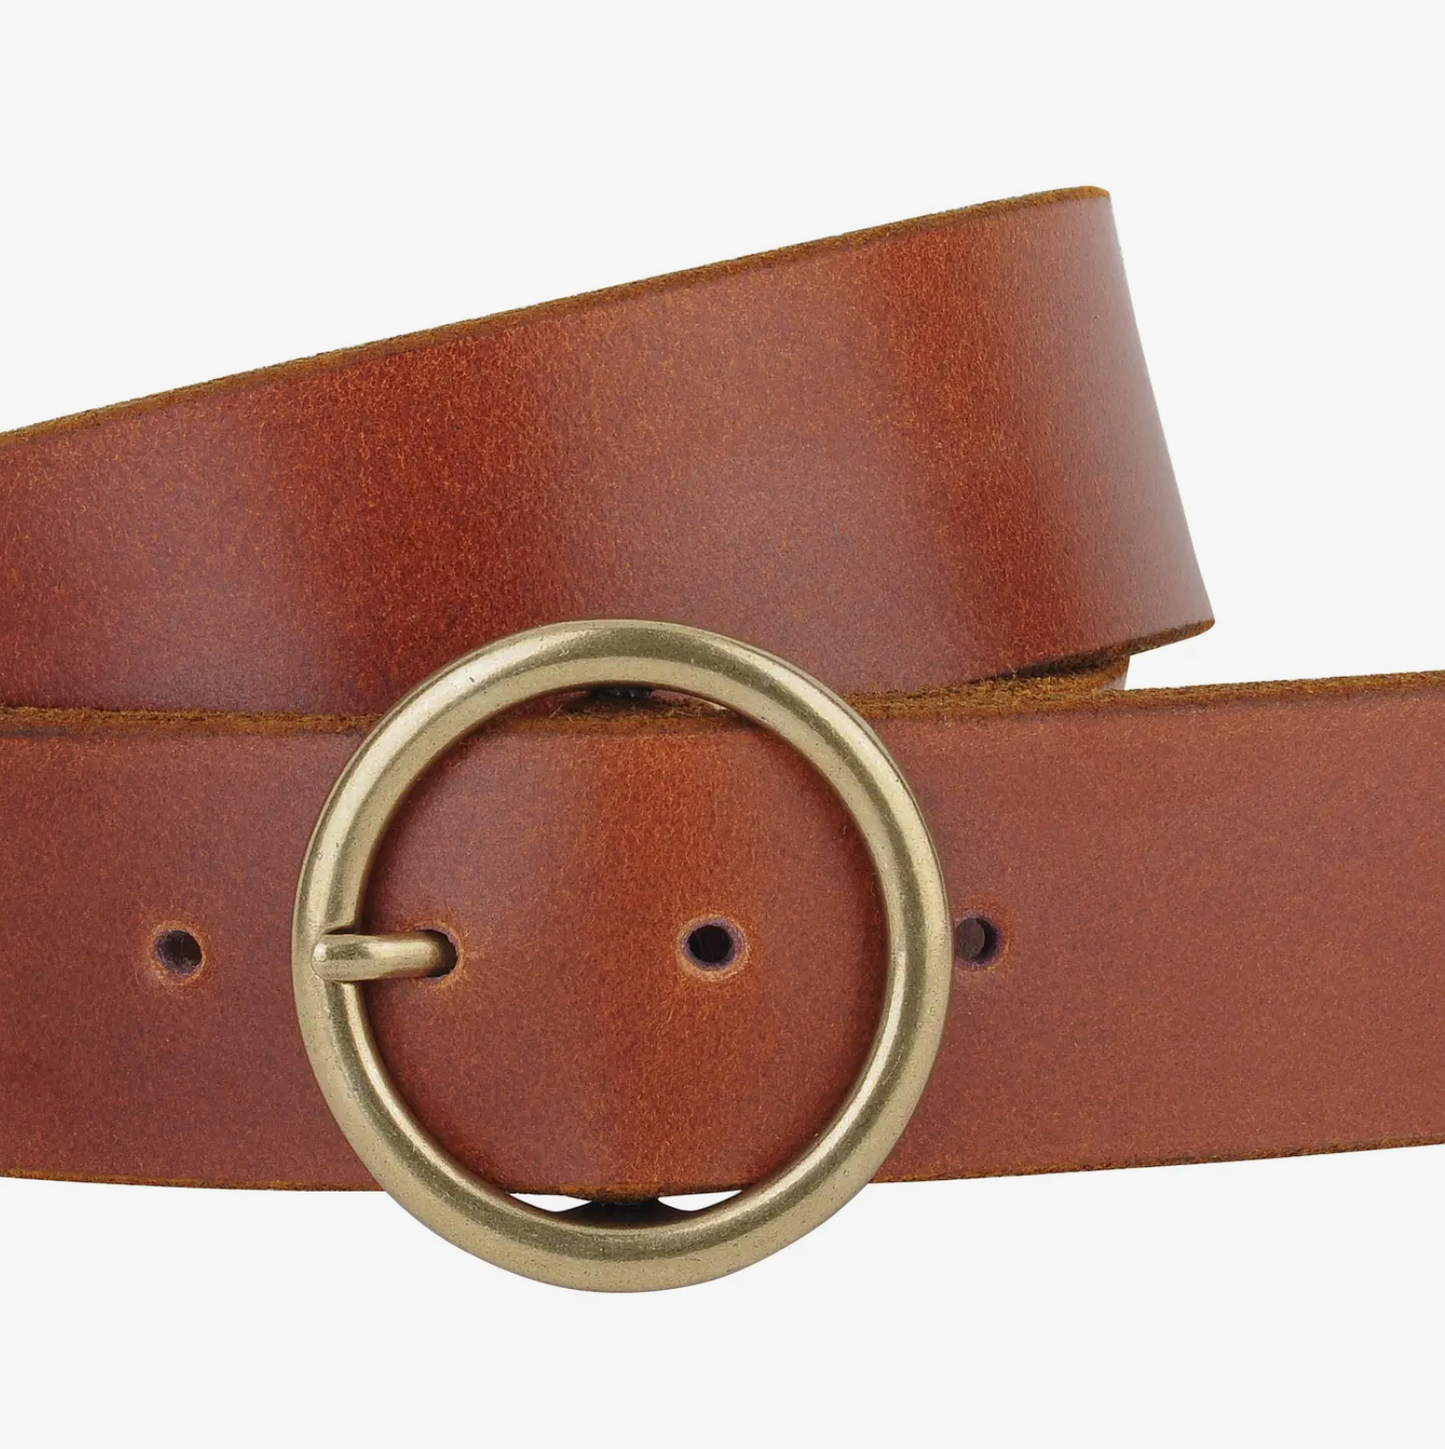 Load image into Gallery viewer, Wide Brass-Toned Ring Buckle Leather Belt -Tan
